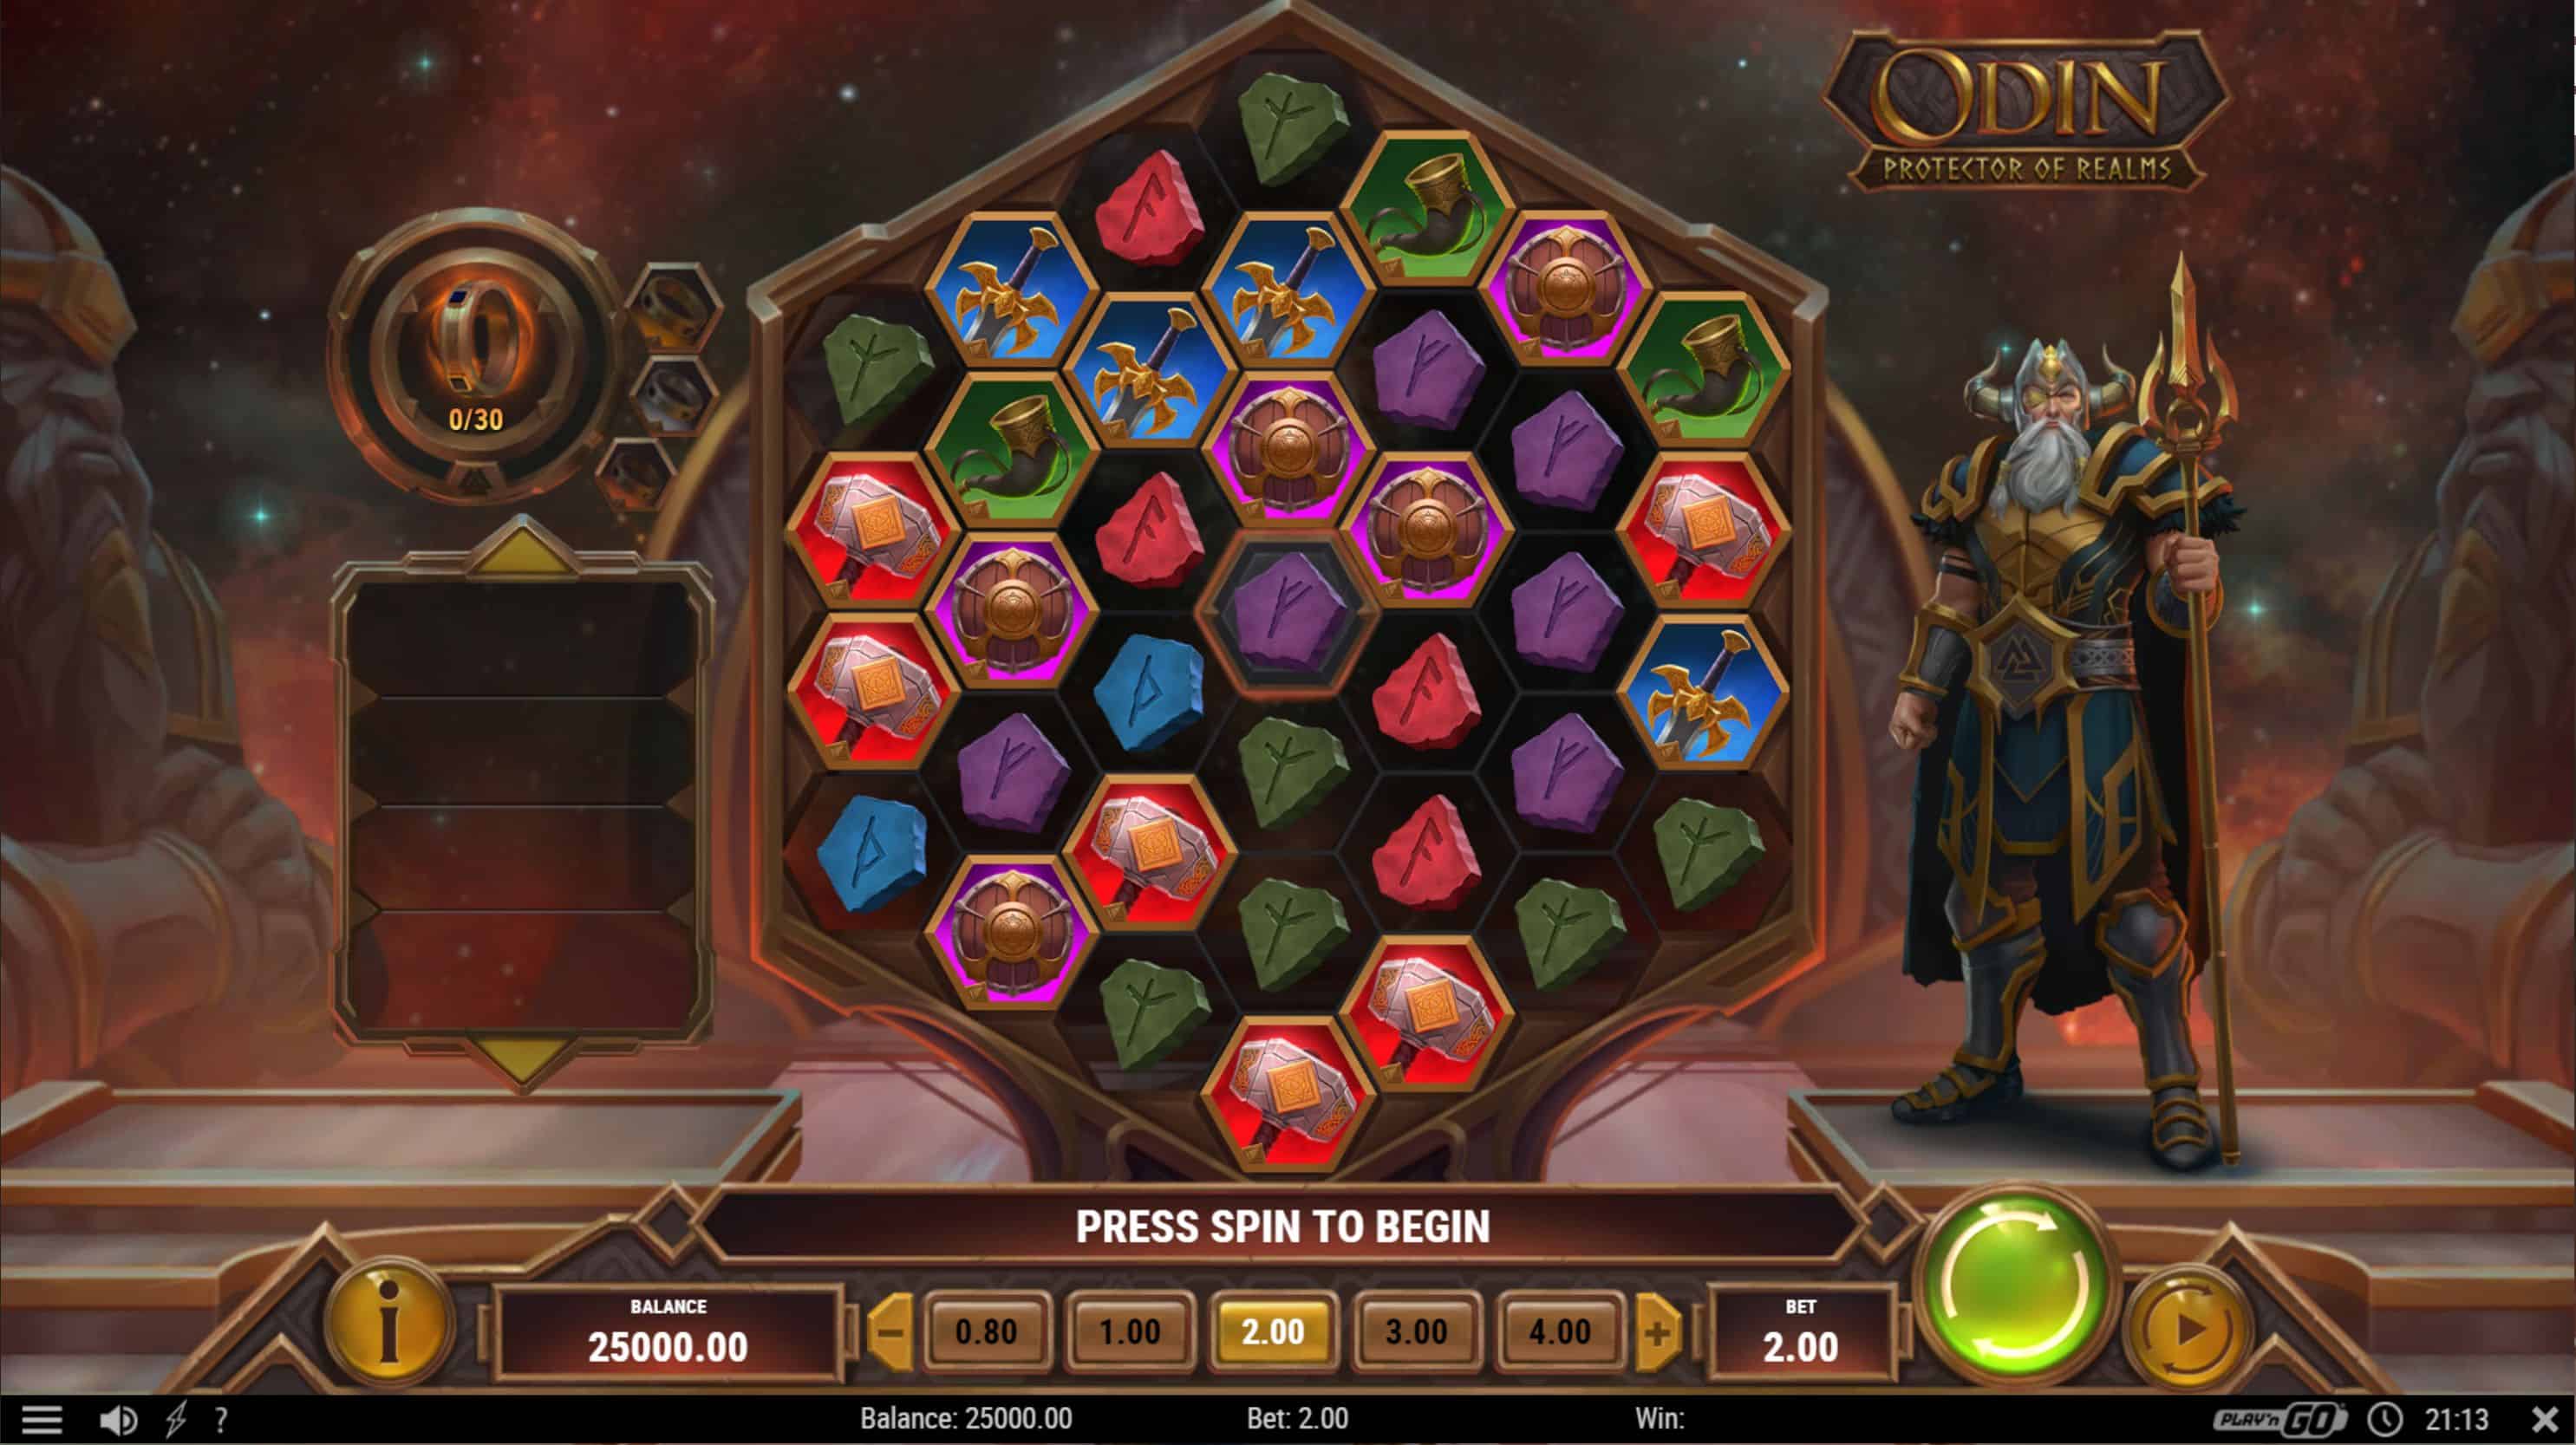 Odin Protector of Realms Slot Game Free Play at Casino Ireland 01